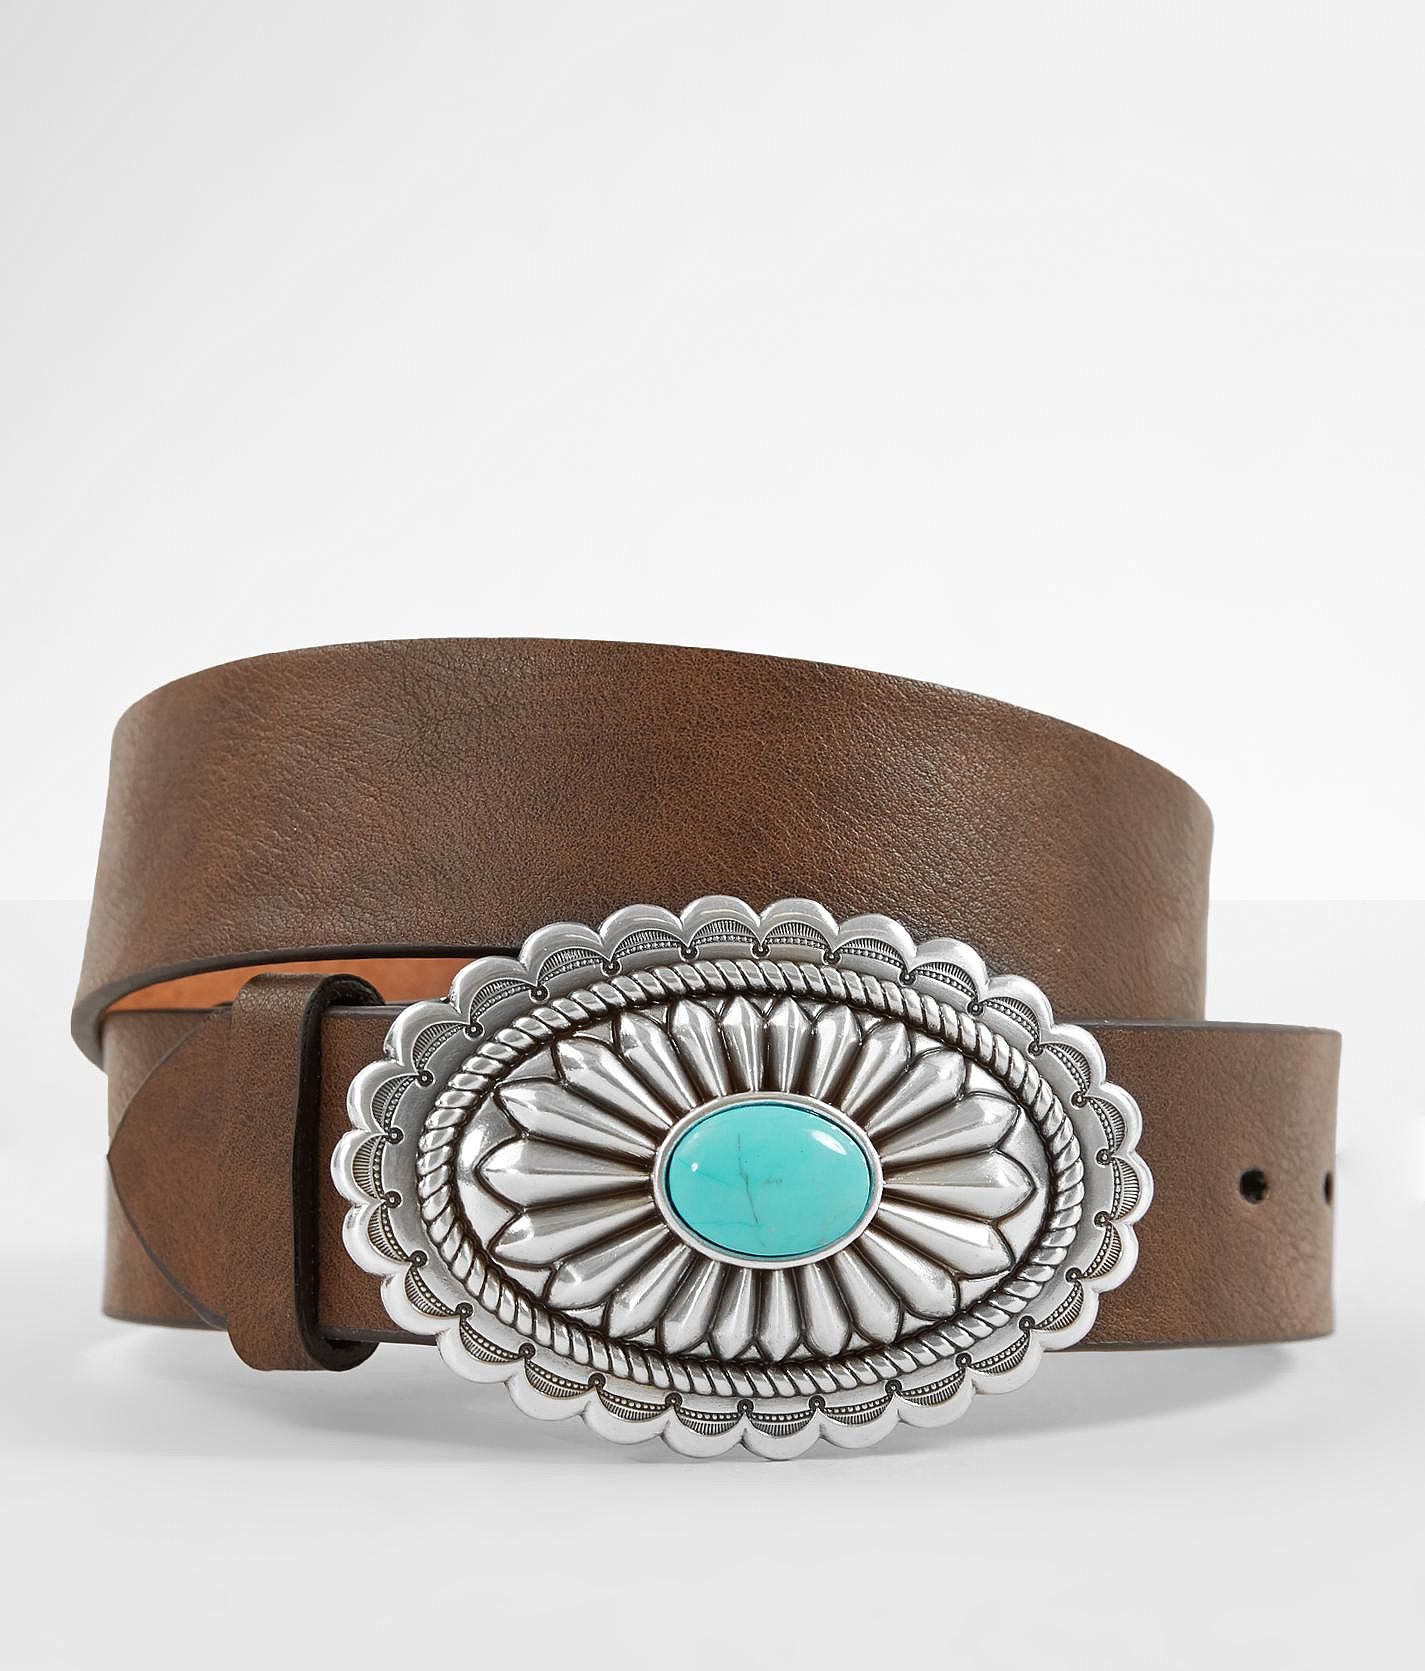 Bke Embroidered Western Belt - Brown X-Small, Women's